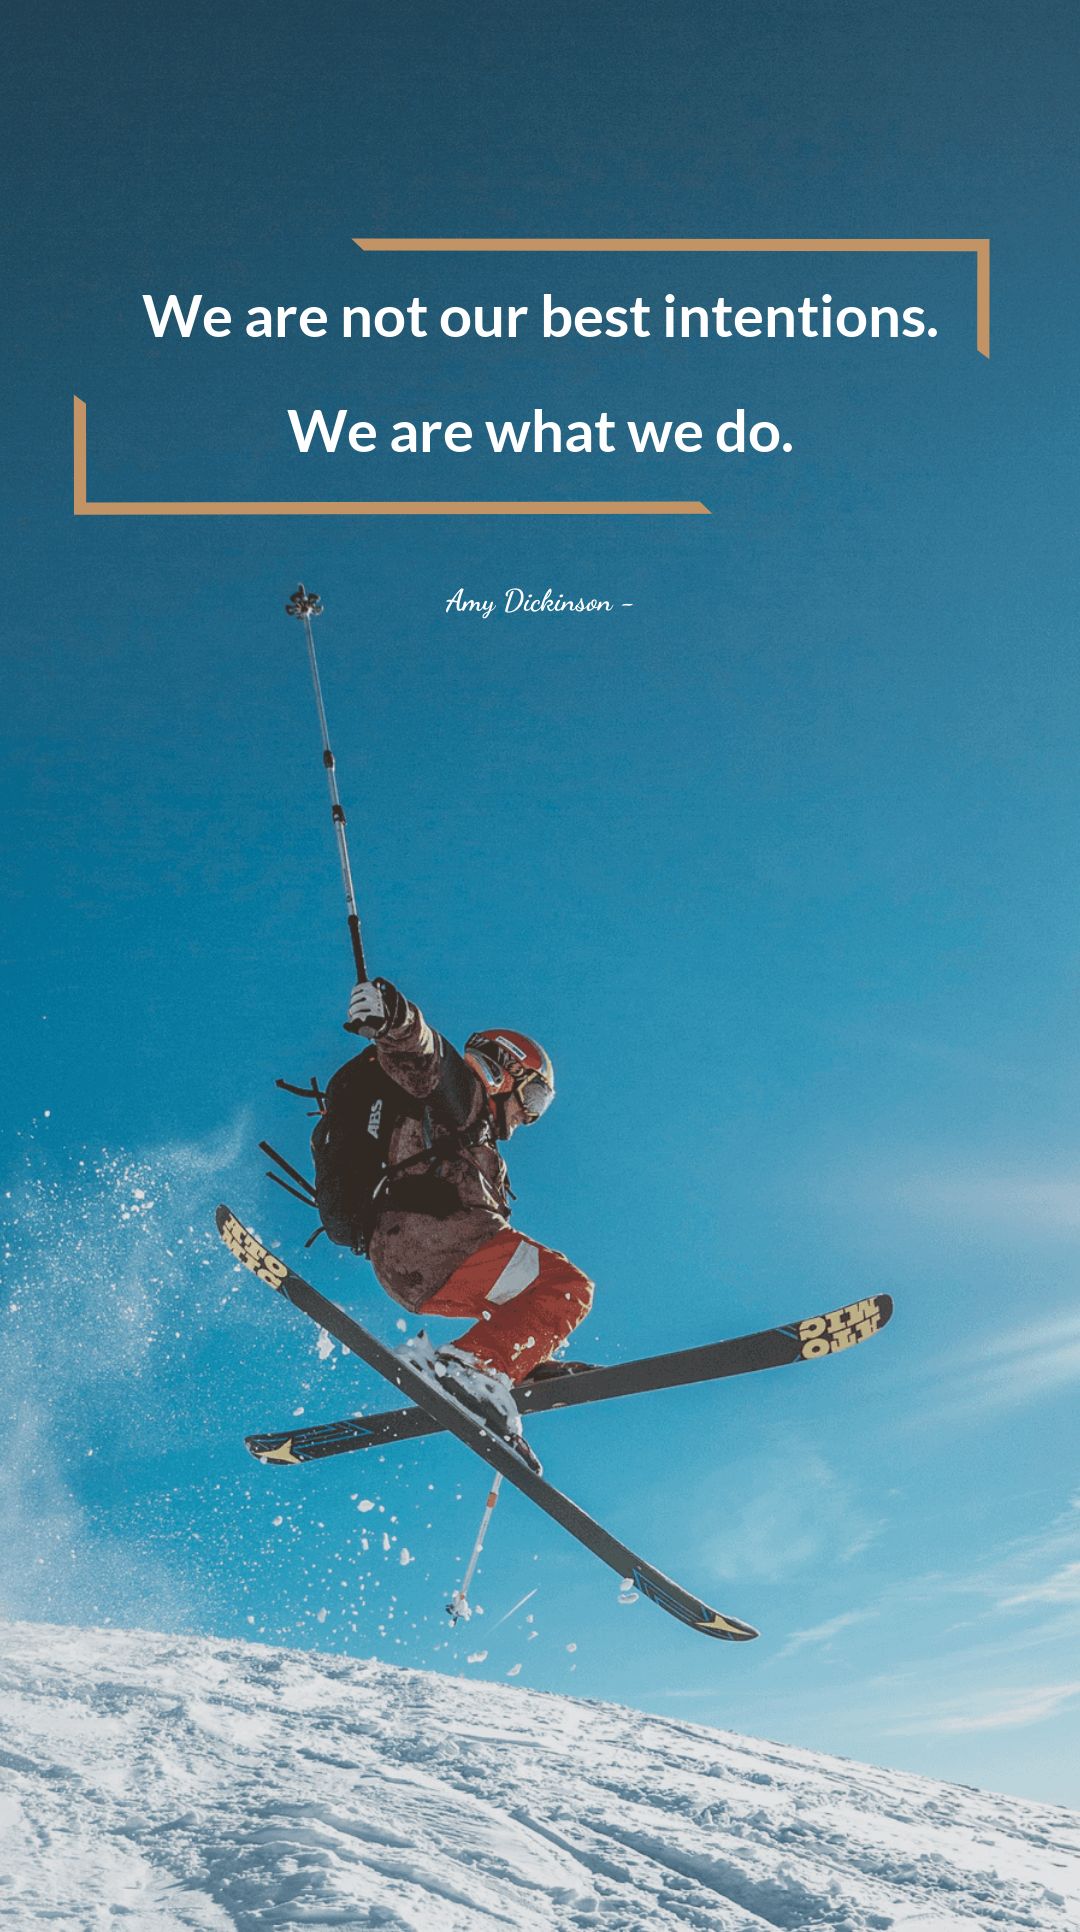 Free Amy Dickinson - We are not our best intentions. We are what we do. in JPG